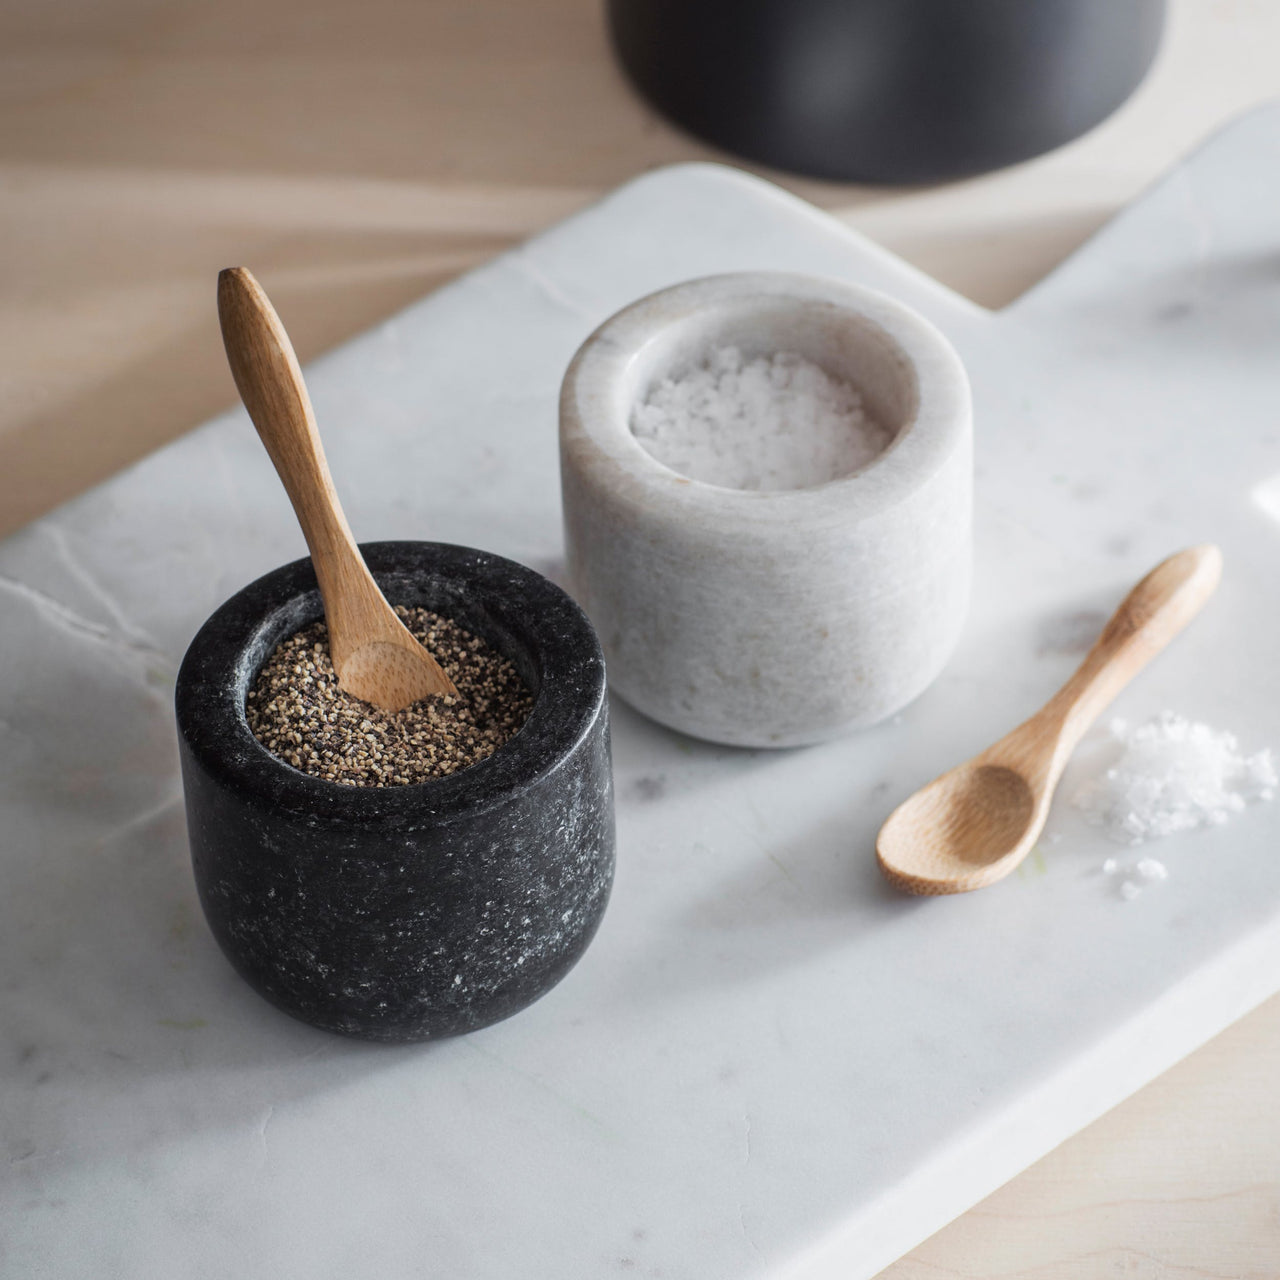 Marble and Granite Salt and Pepper Sets